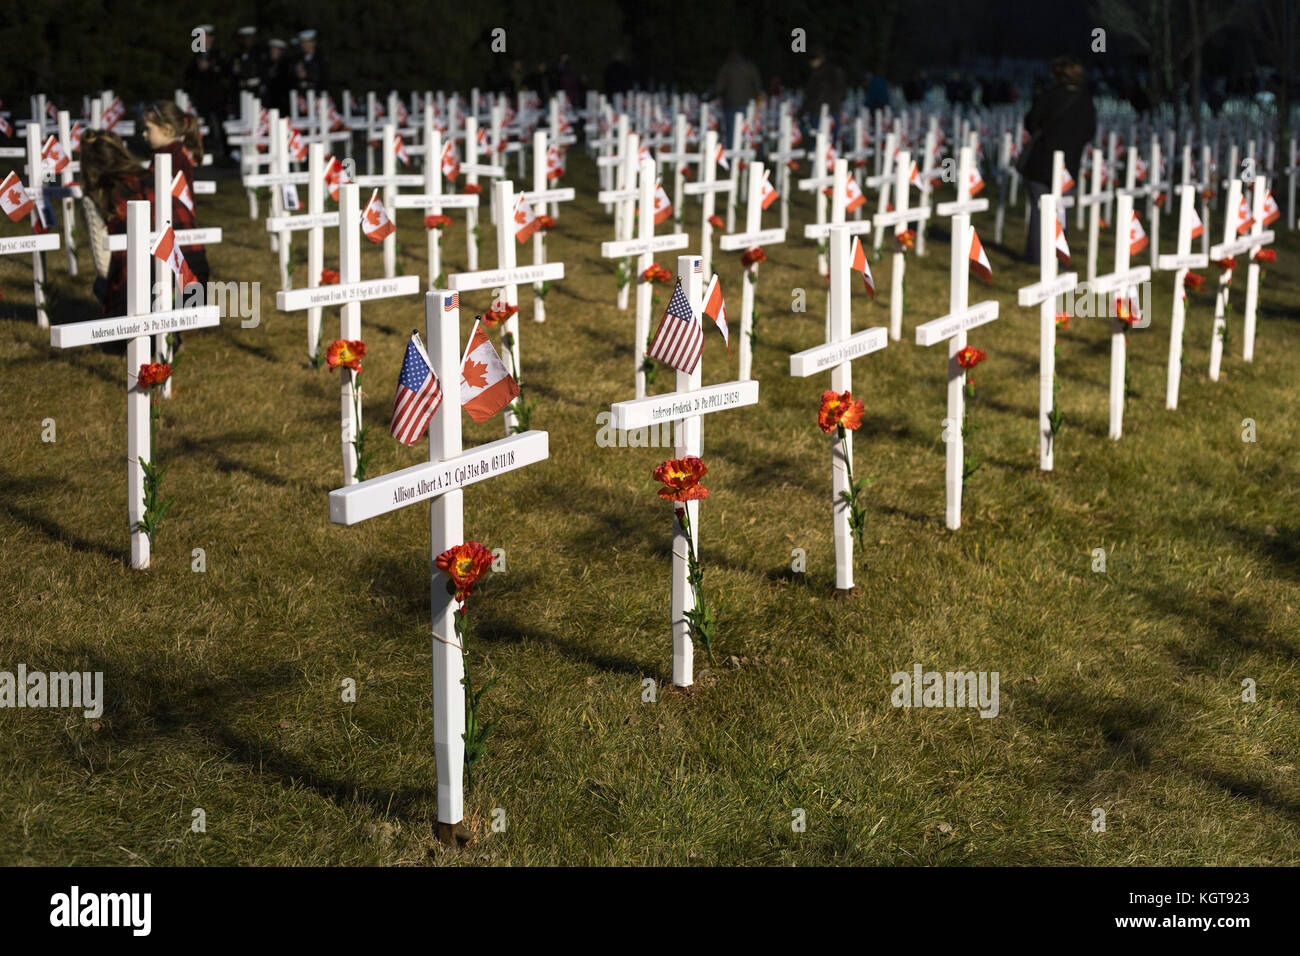 Field of Crosses memorial for fallen soldiers on Remembrance Day, with Canadian and American flags Stock Photo